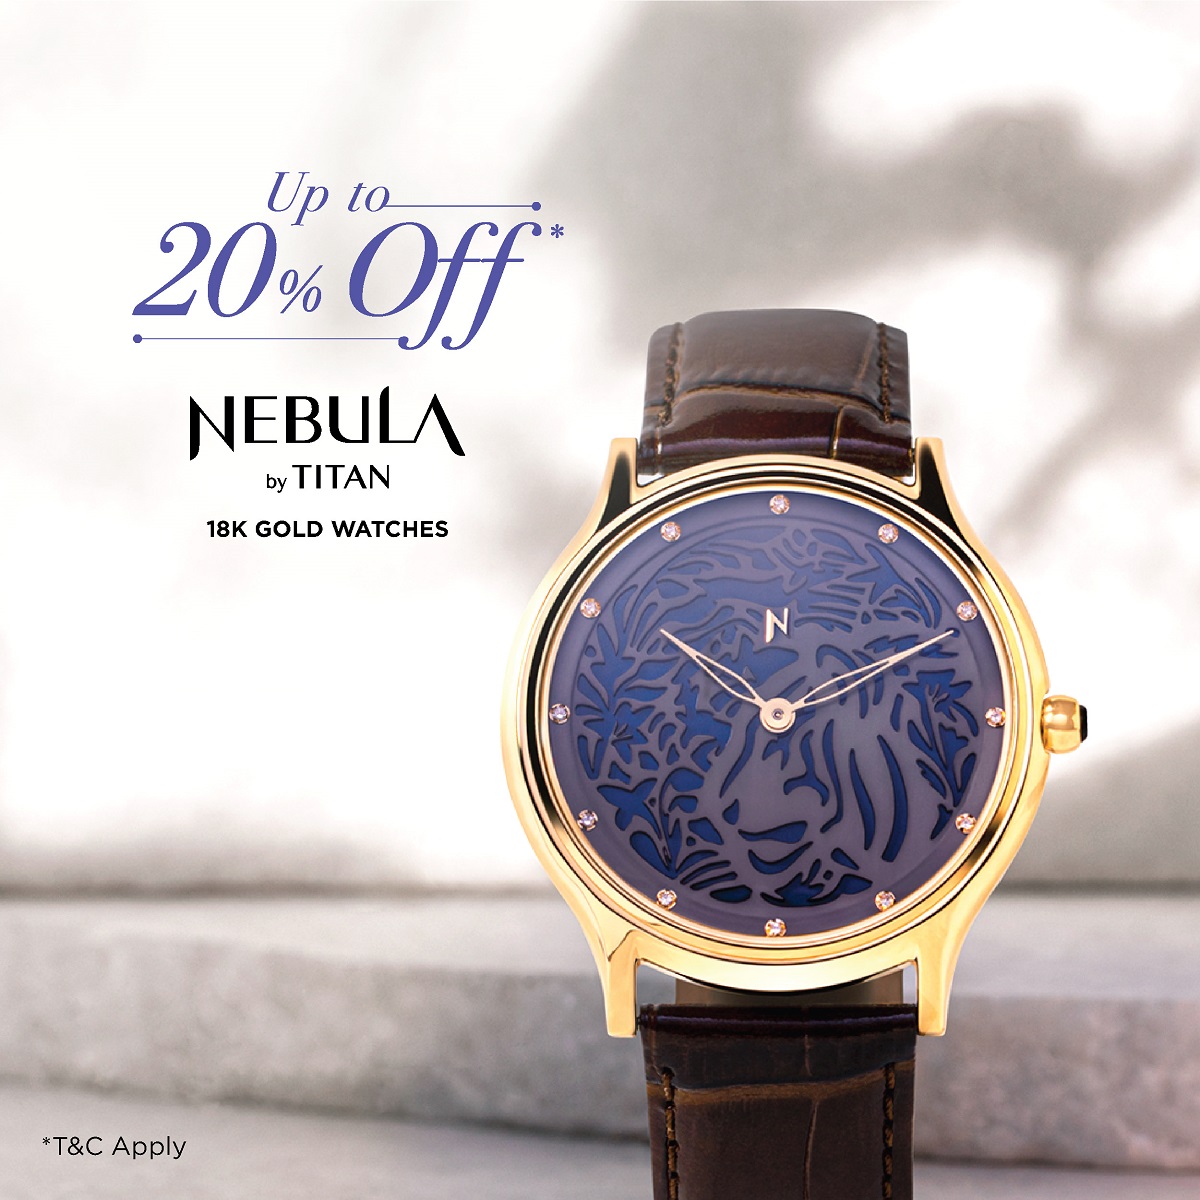 Nebula offers an exciting 20% Festive Discount!